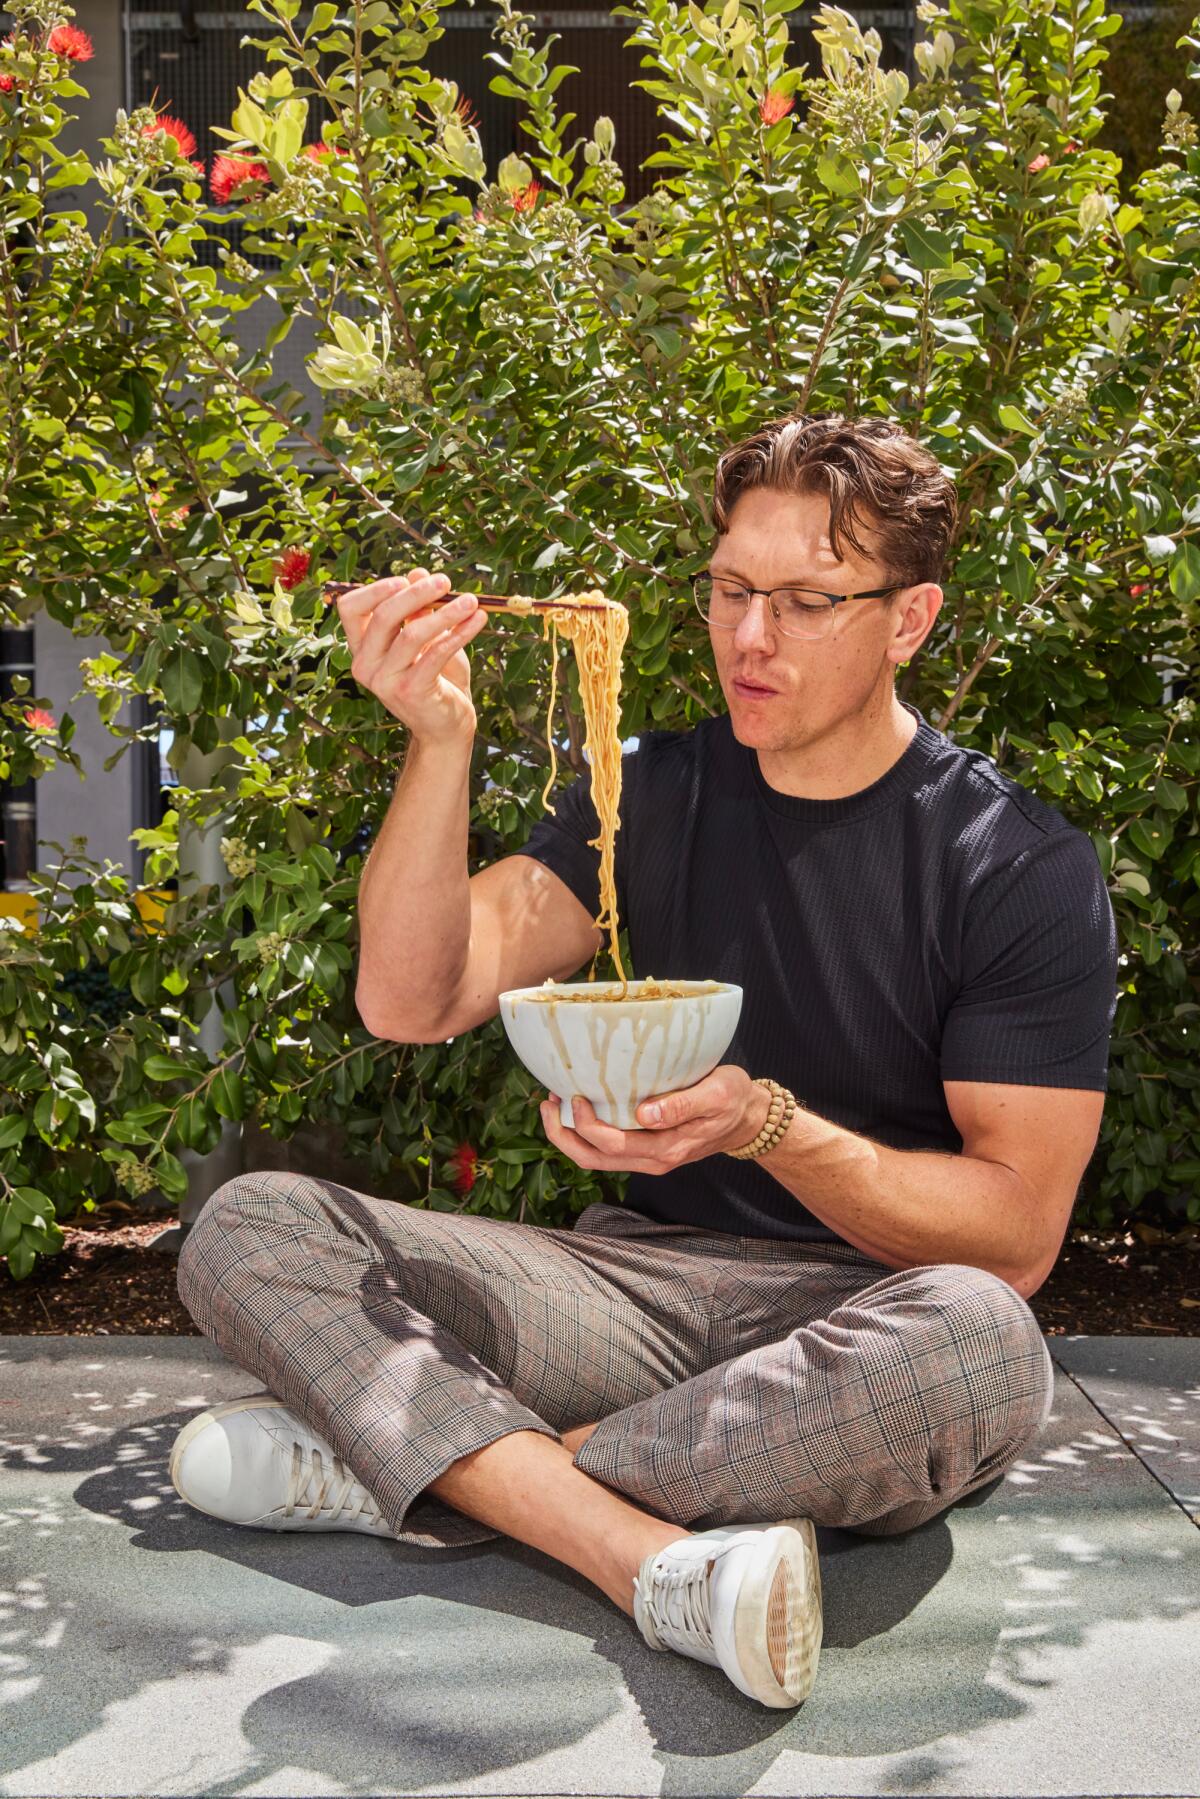 A man sits cross-legged on the ground outdoors, lifting ramen from a bowl with chopsticks